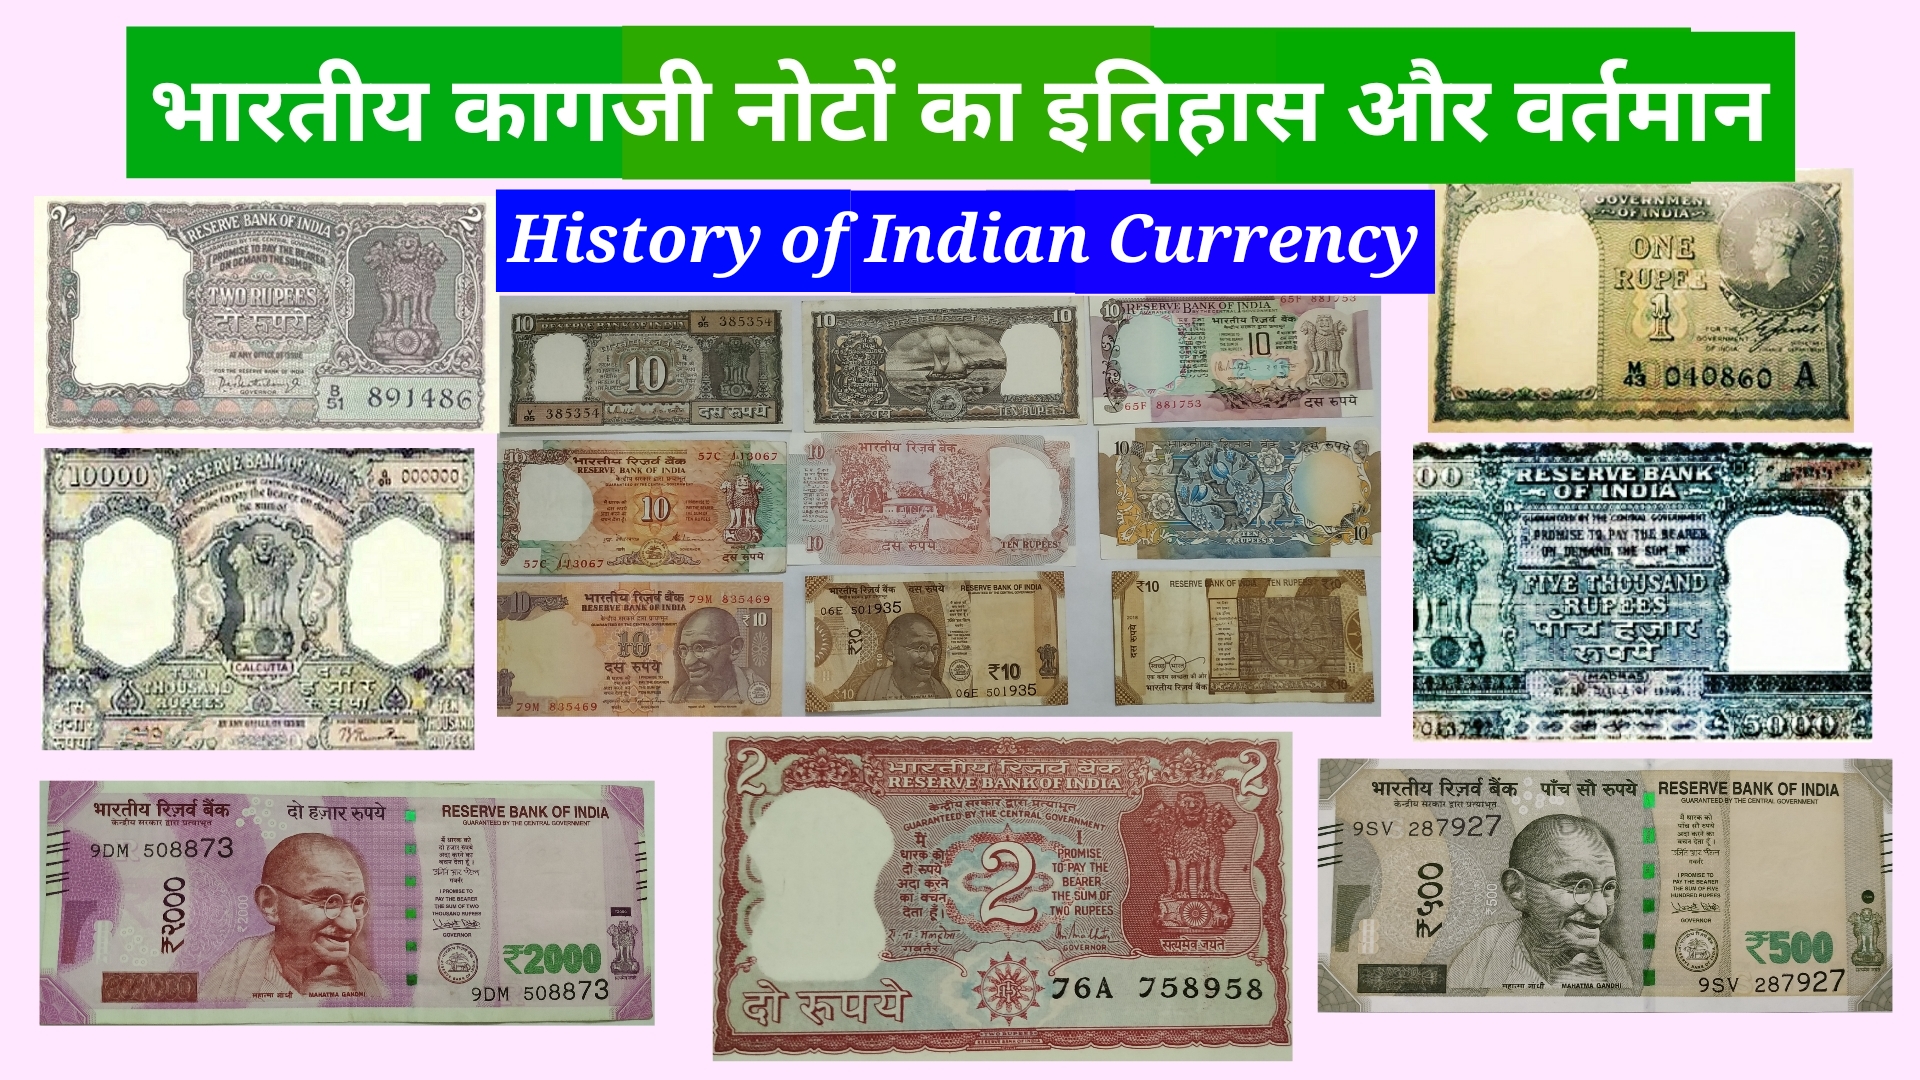 History of Indian currency